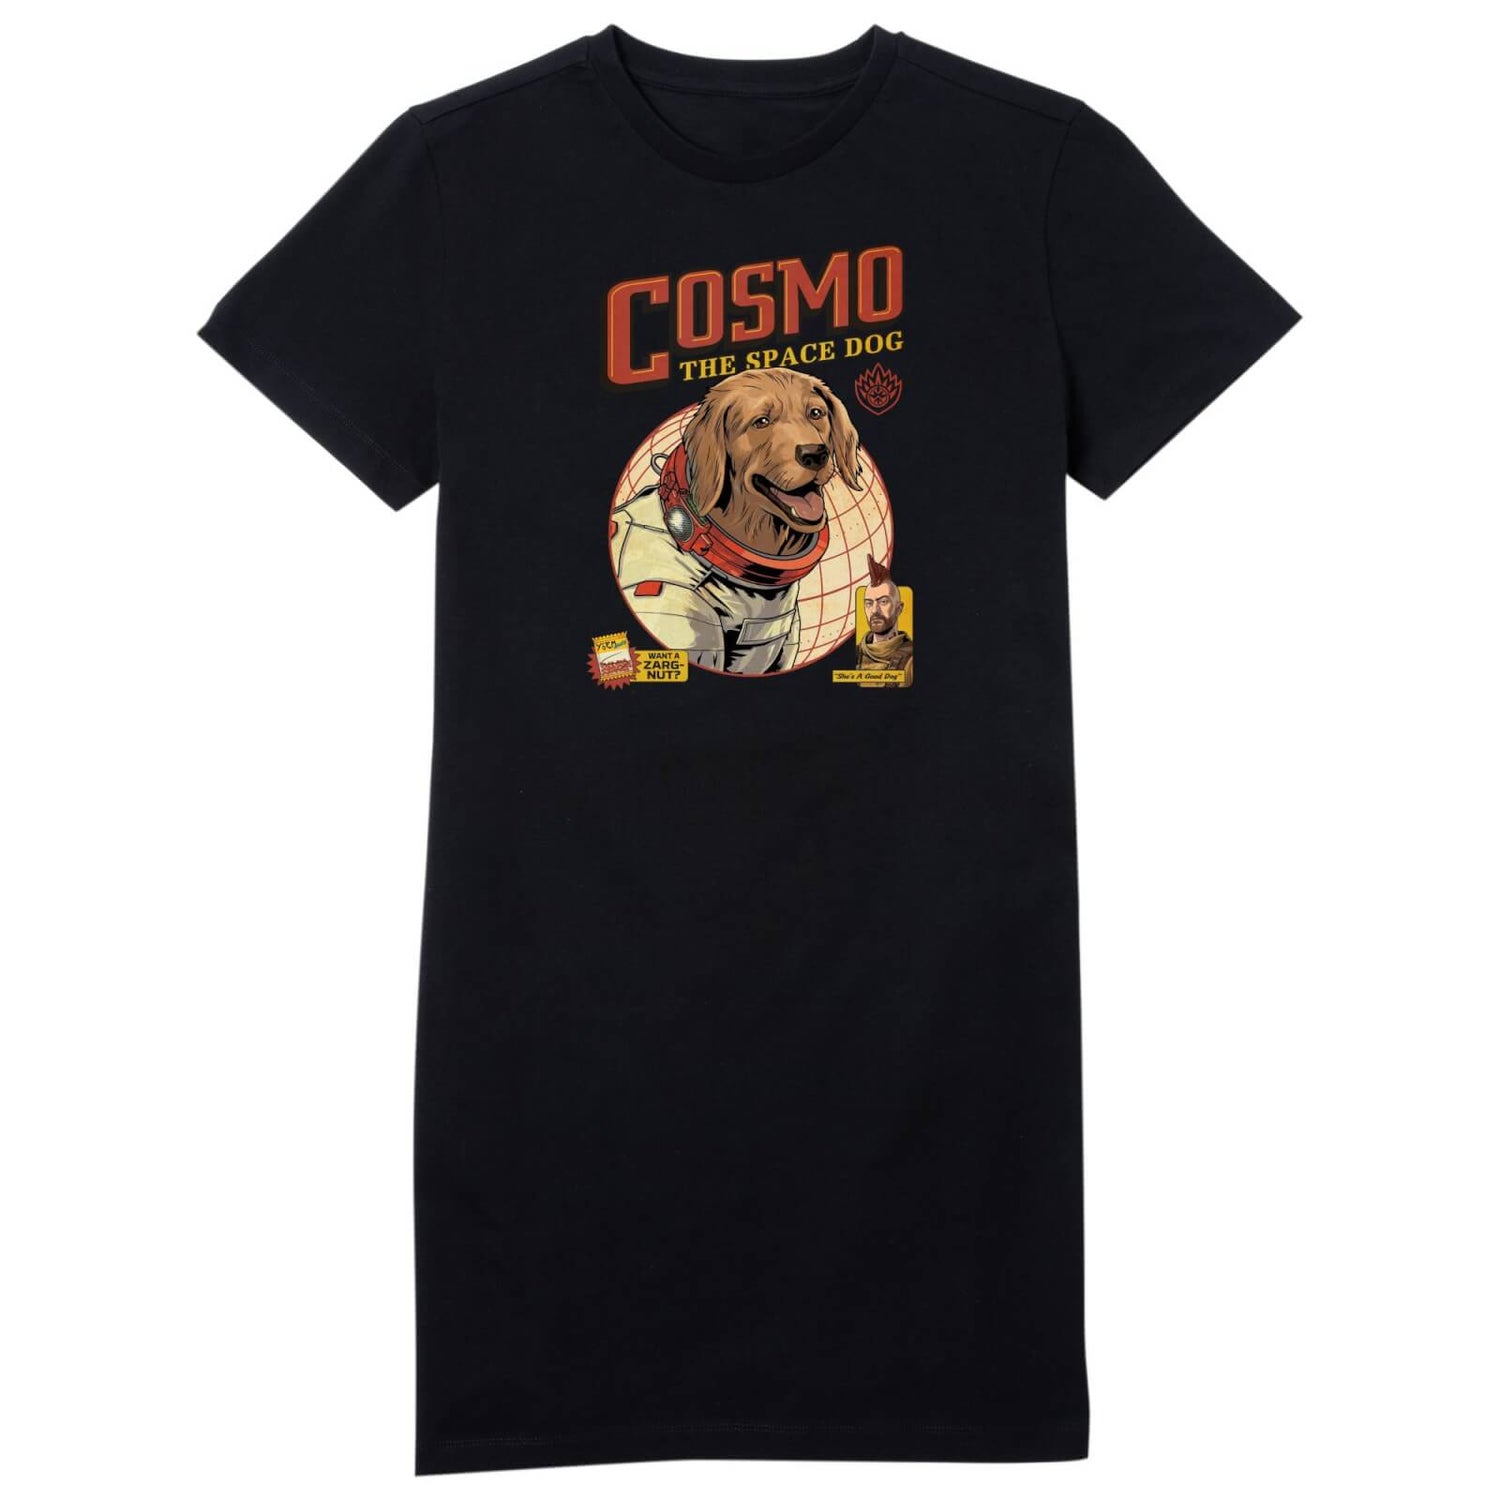 Guardians of the Galaxy Cosmo The Space Dog Women's T-Shirt Dress - Black